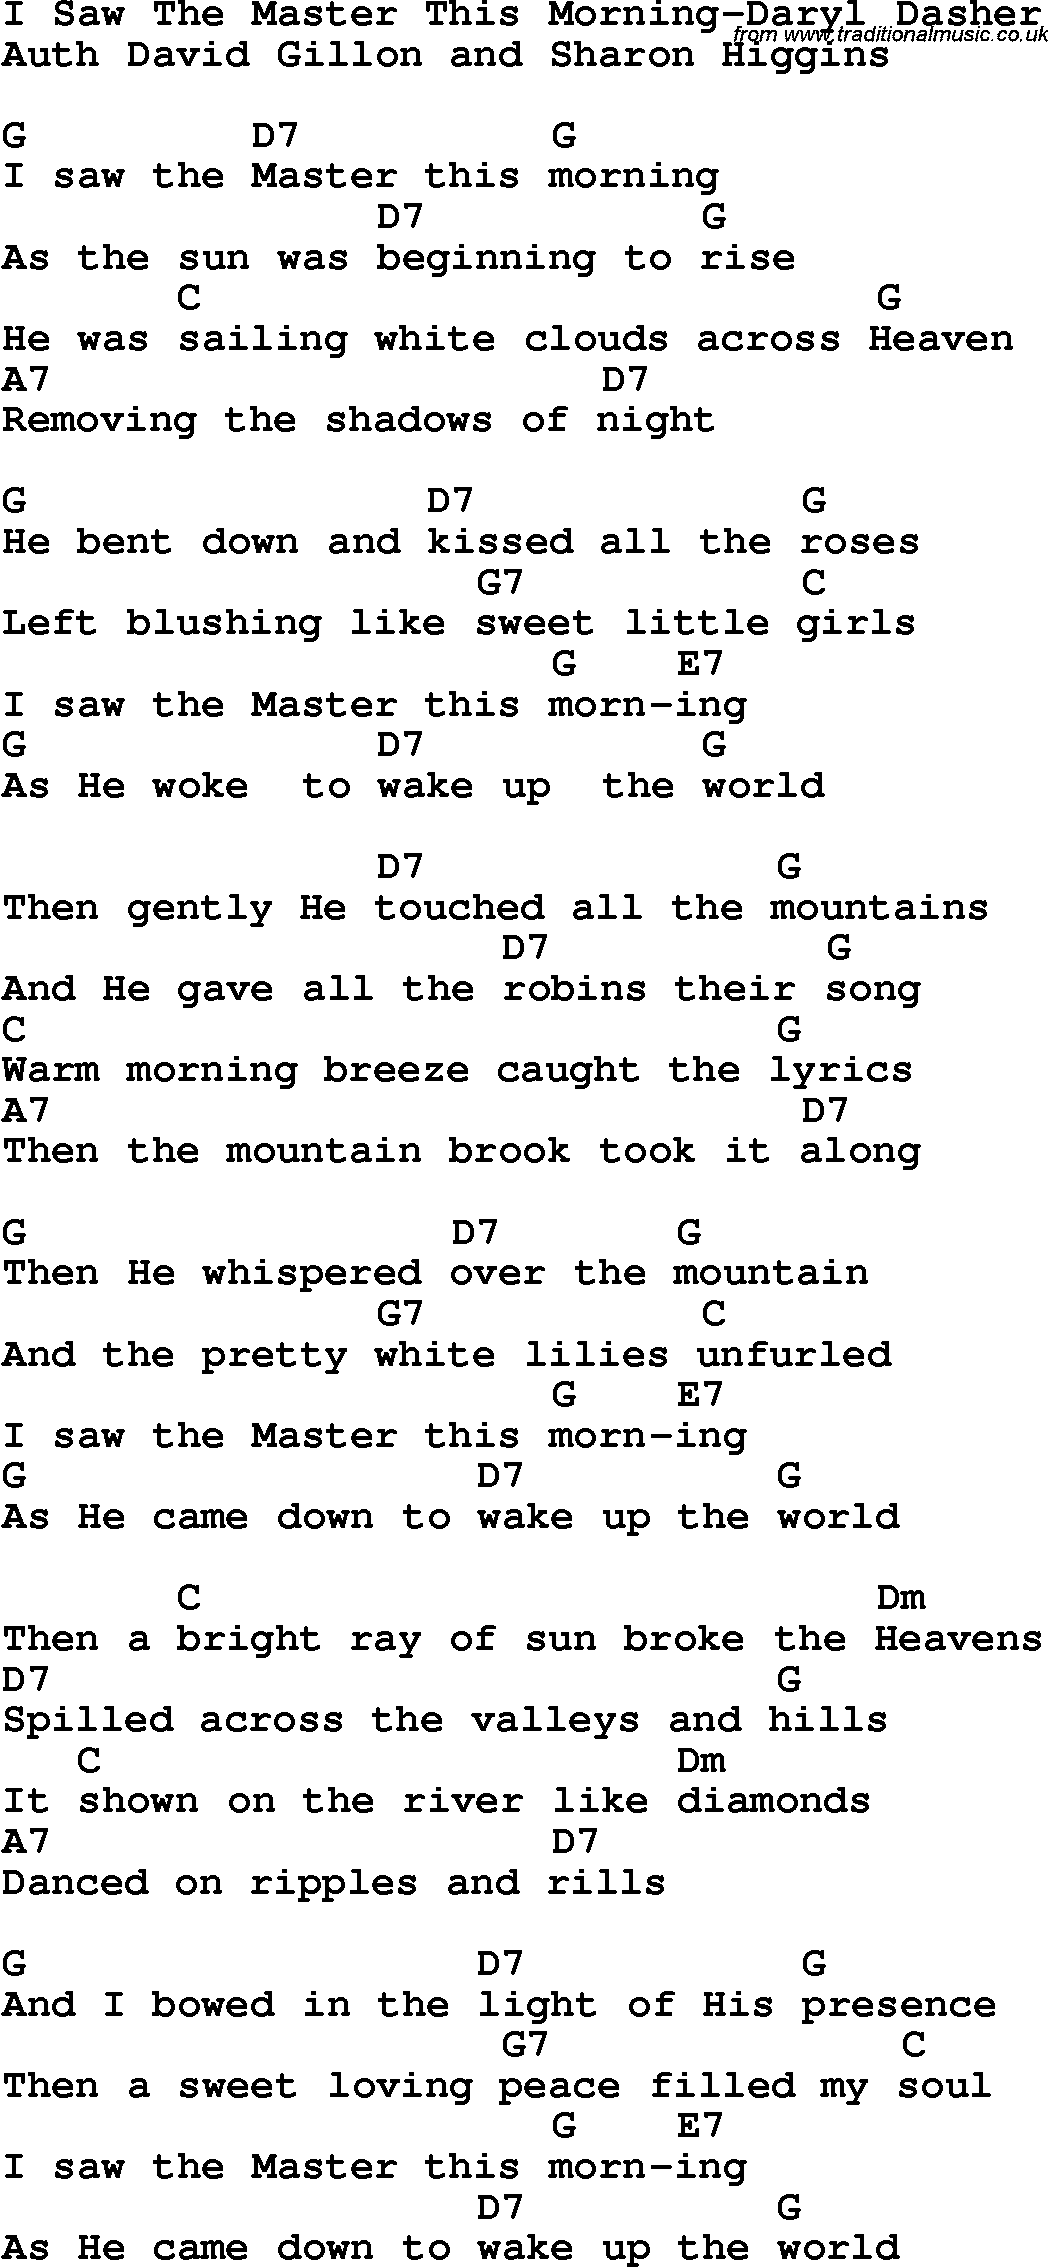 Country, Southern and Bluegrass Gospel Song I Saw The Master This Morning-Daryl Dasher lyrics and chords